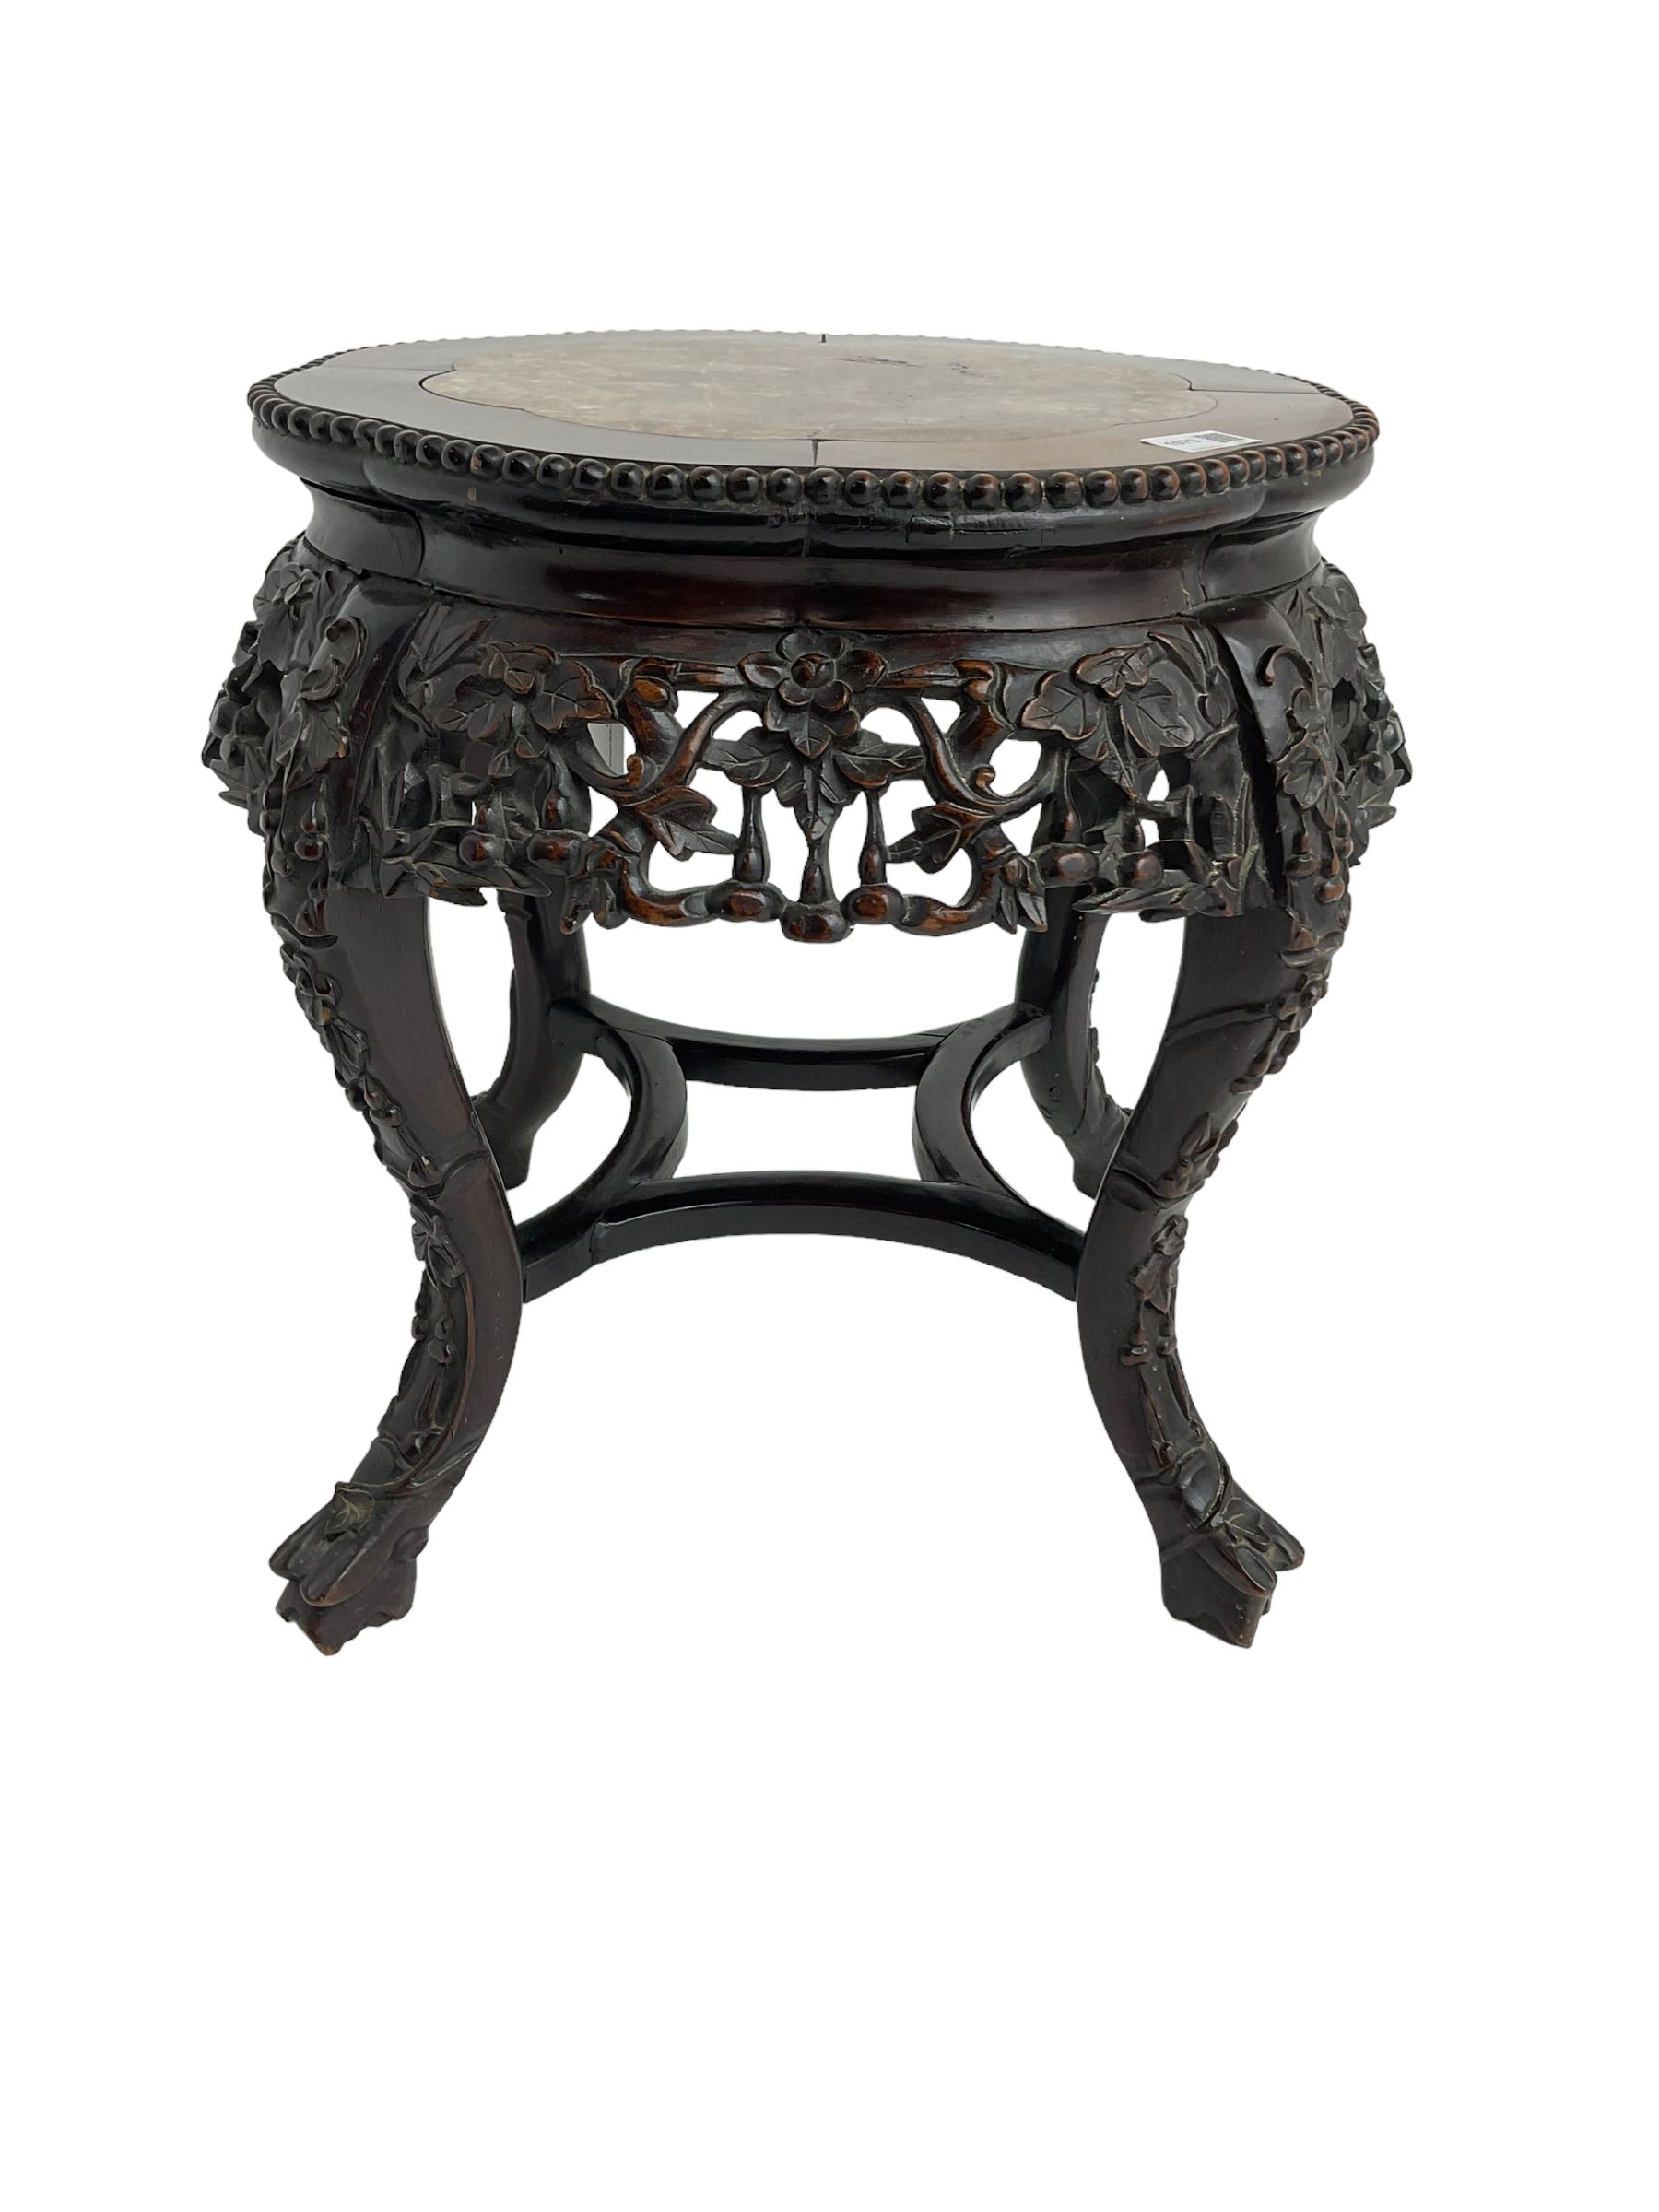 Chinese carved hardwood occasional table - Image 4 of 5